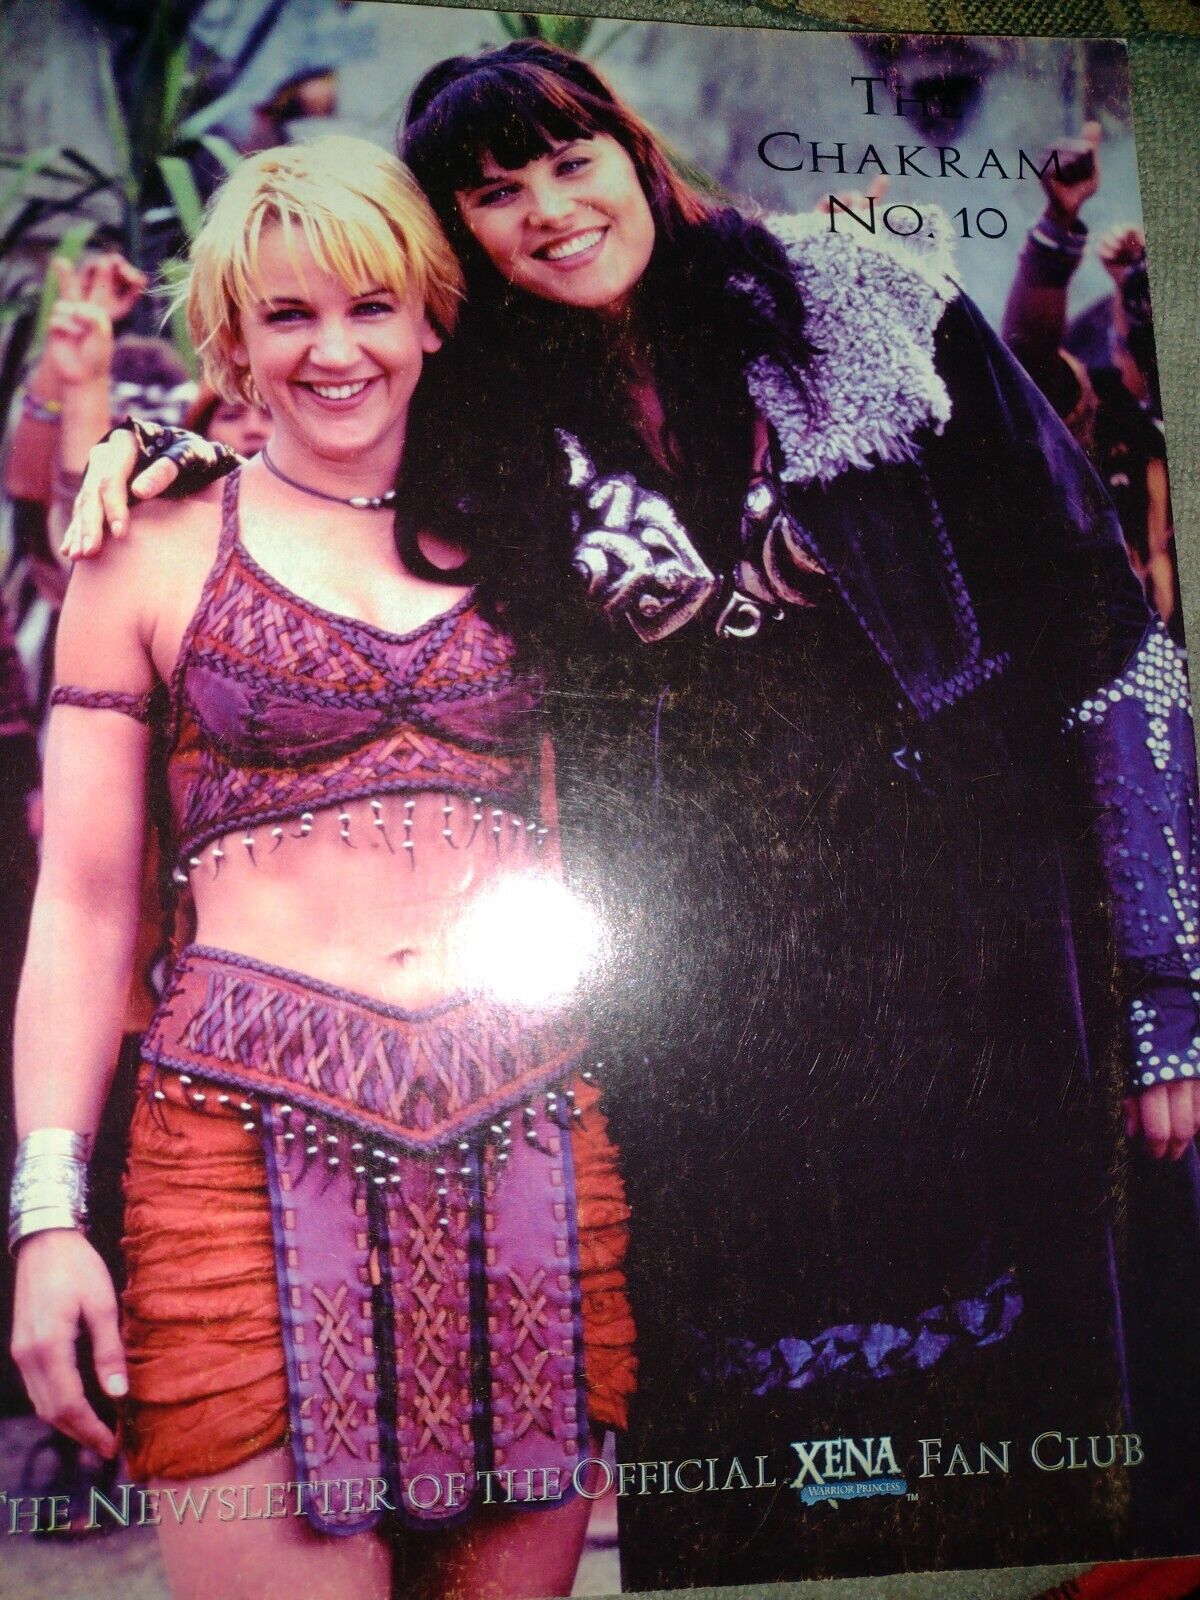 The Newsletter of the Official Xena Warrior Princess Fan Club - Chakram No. 10